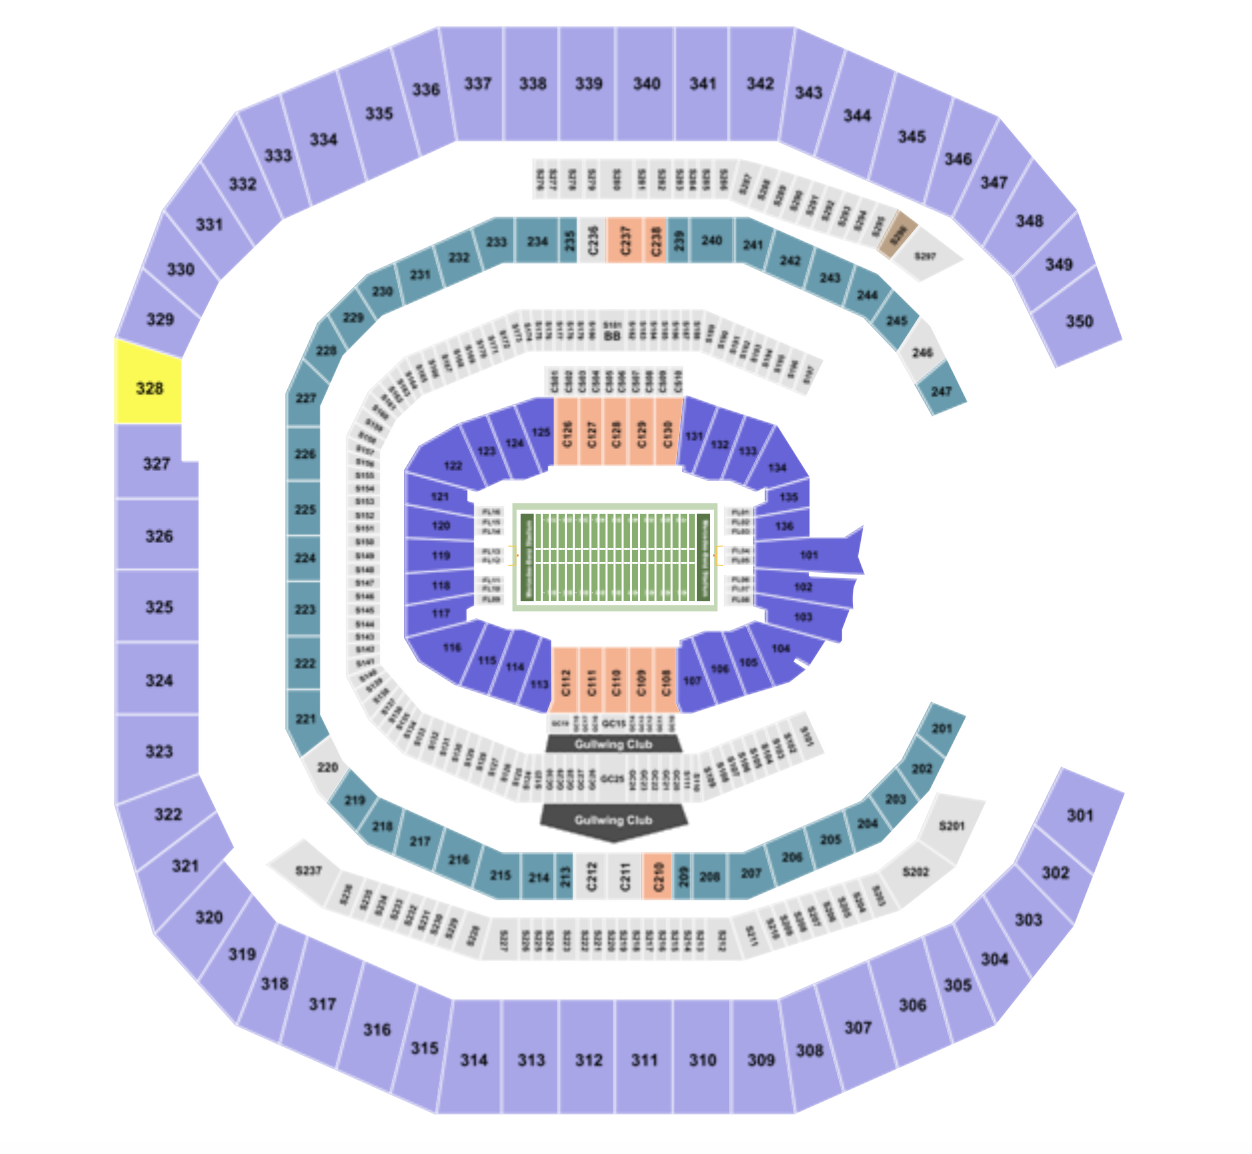 Mercedes Benz Stadium Seating Chart With Rows And Seat Numbers